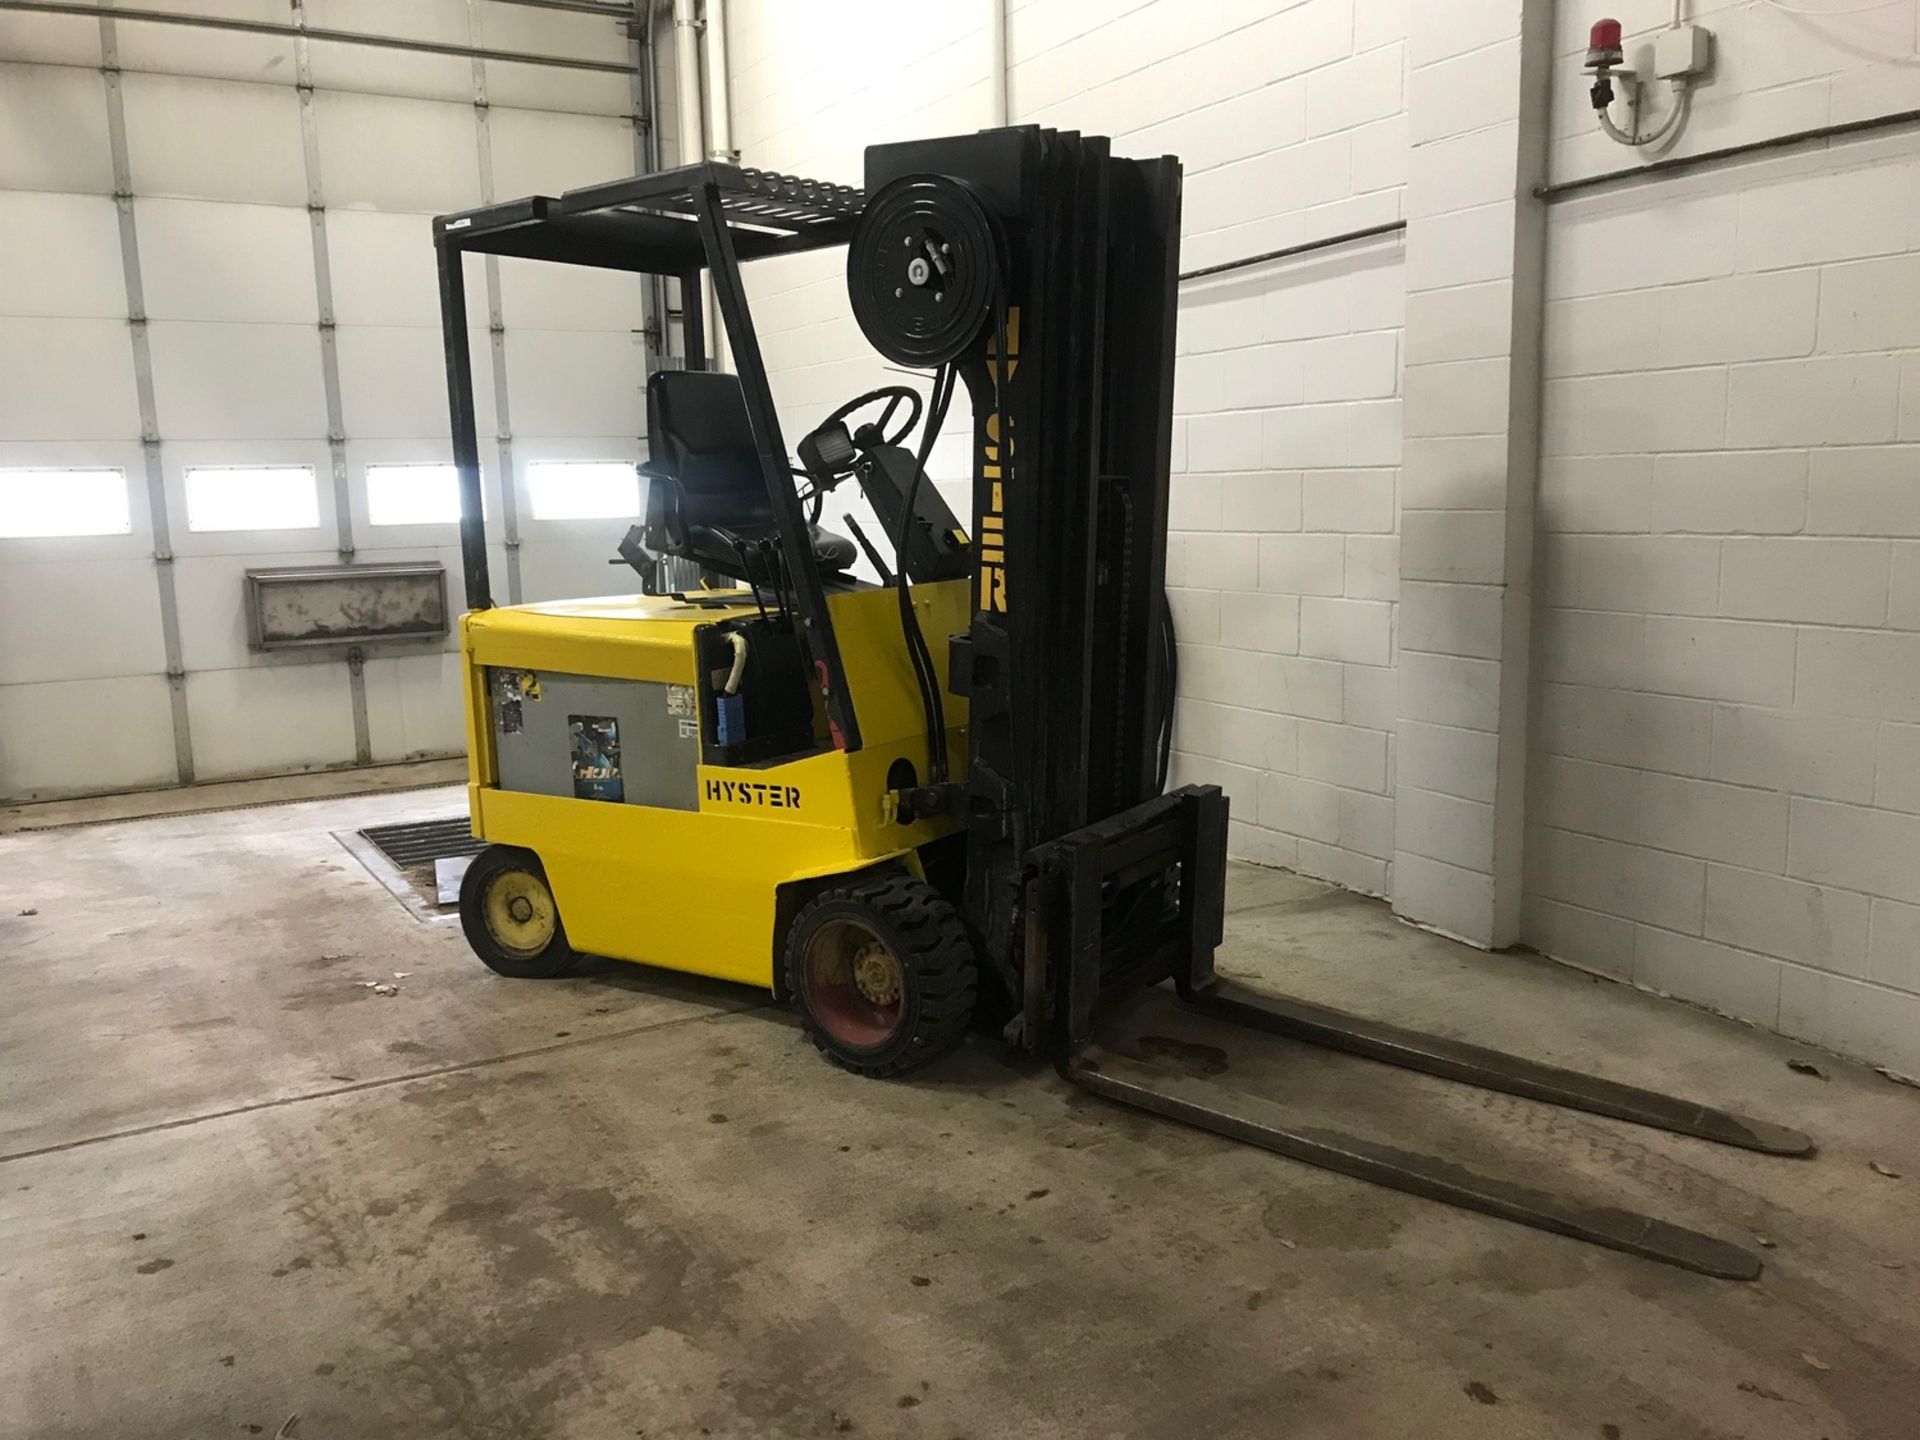 Hyster Electric Forklift, Model # E50XL-33, 4 Stage, Side Shift, 240" Lift Height, 4.5'Forks, 48